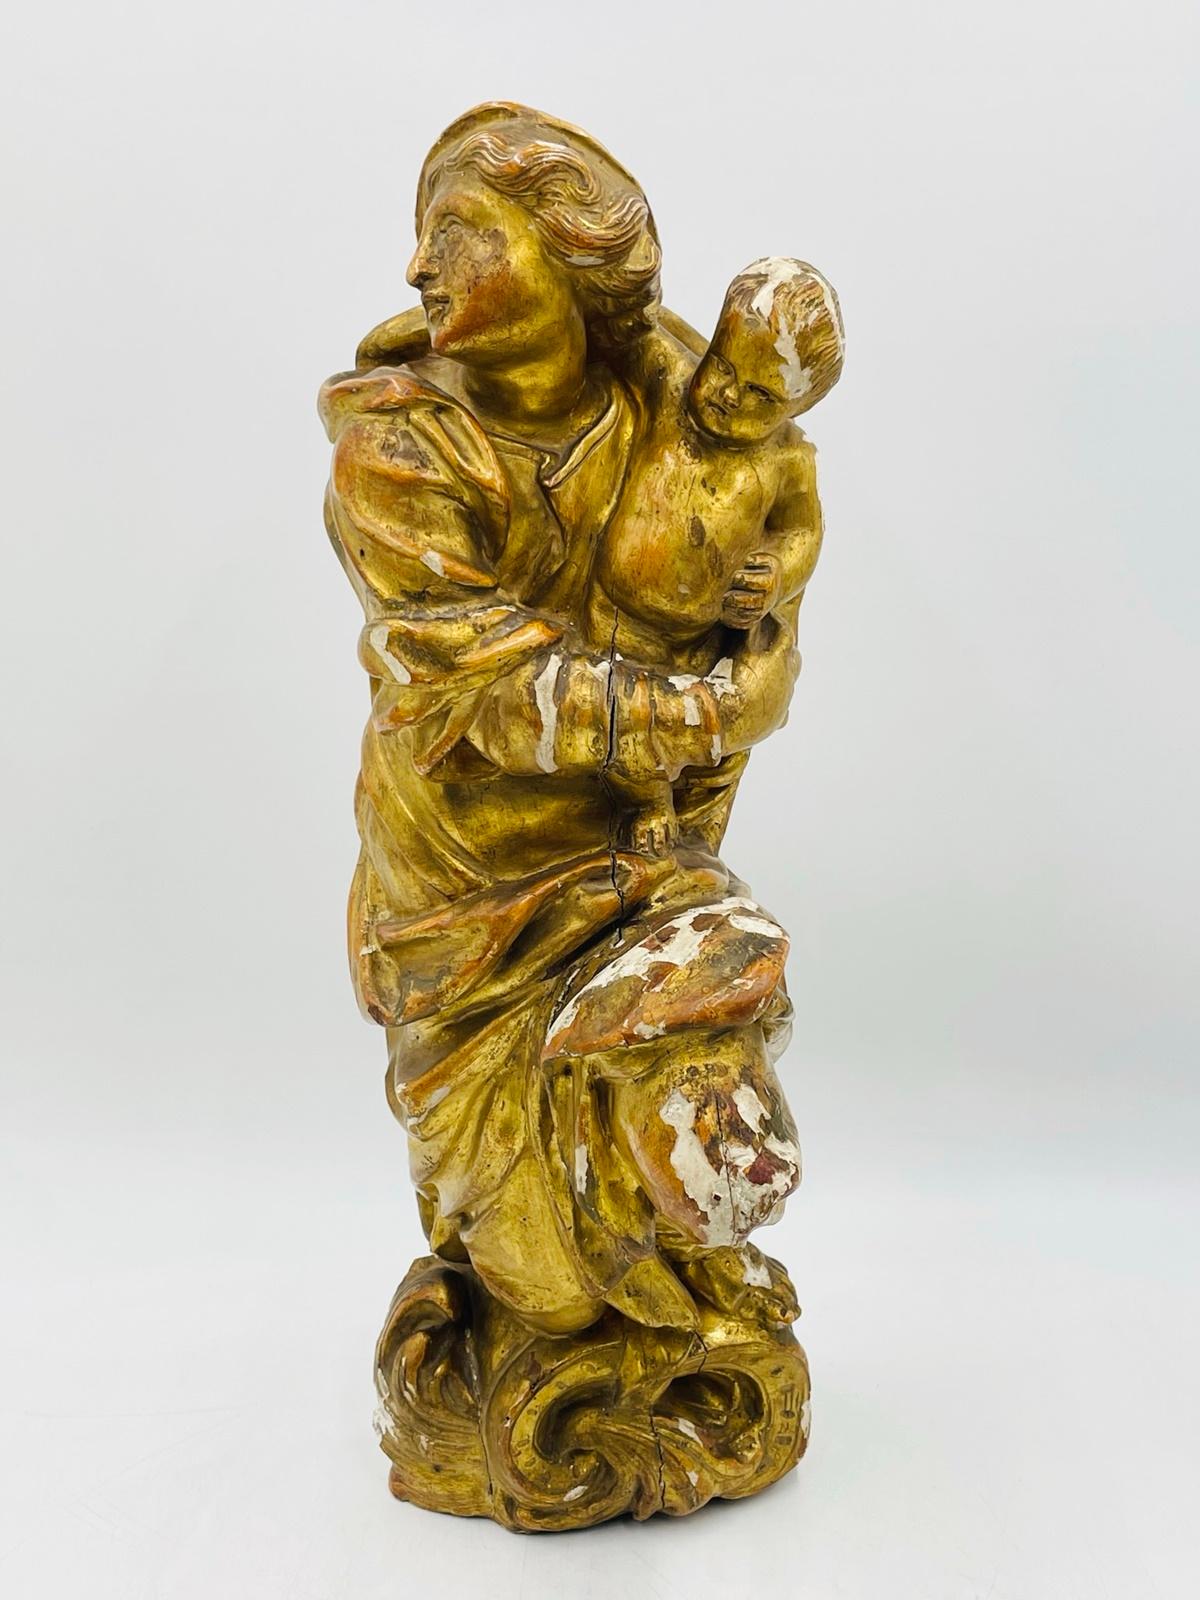 Introducing our exquisite Antique Madonna & Child Sculpture/Religious Icon, originating from 19th-century Italy. This captivating masterpiece showcases a stunning portrayal of a woman gracefully cradling a baby, symbolizing the iconic Madonna and